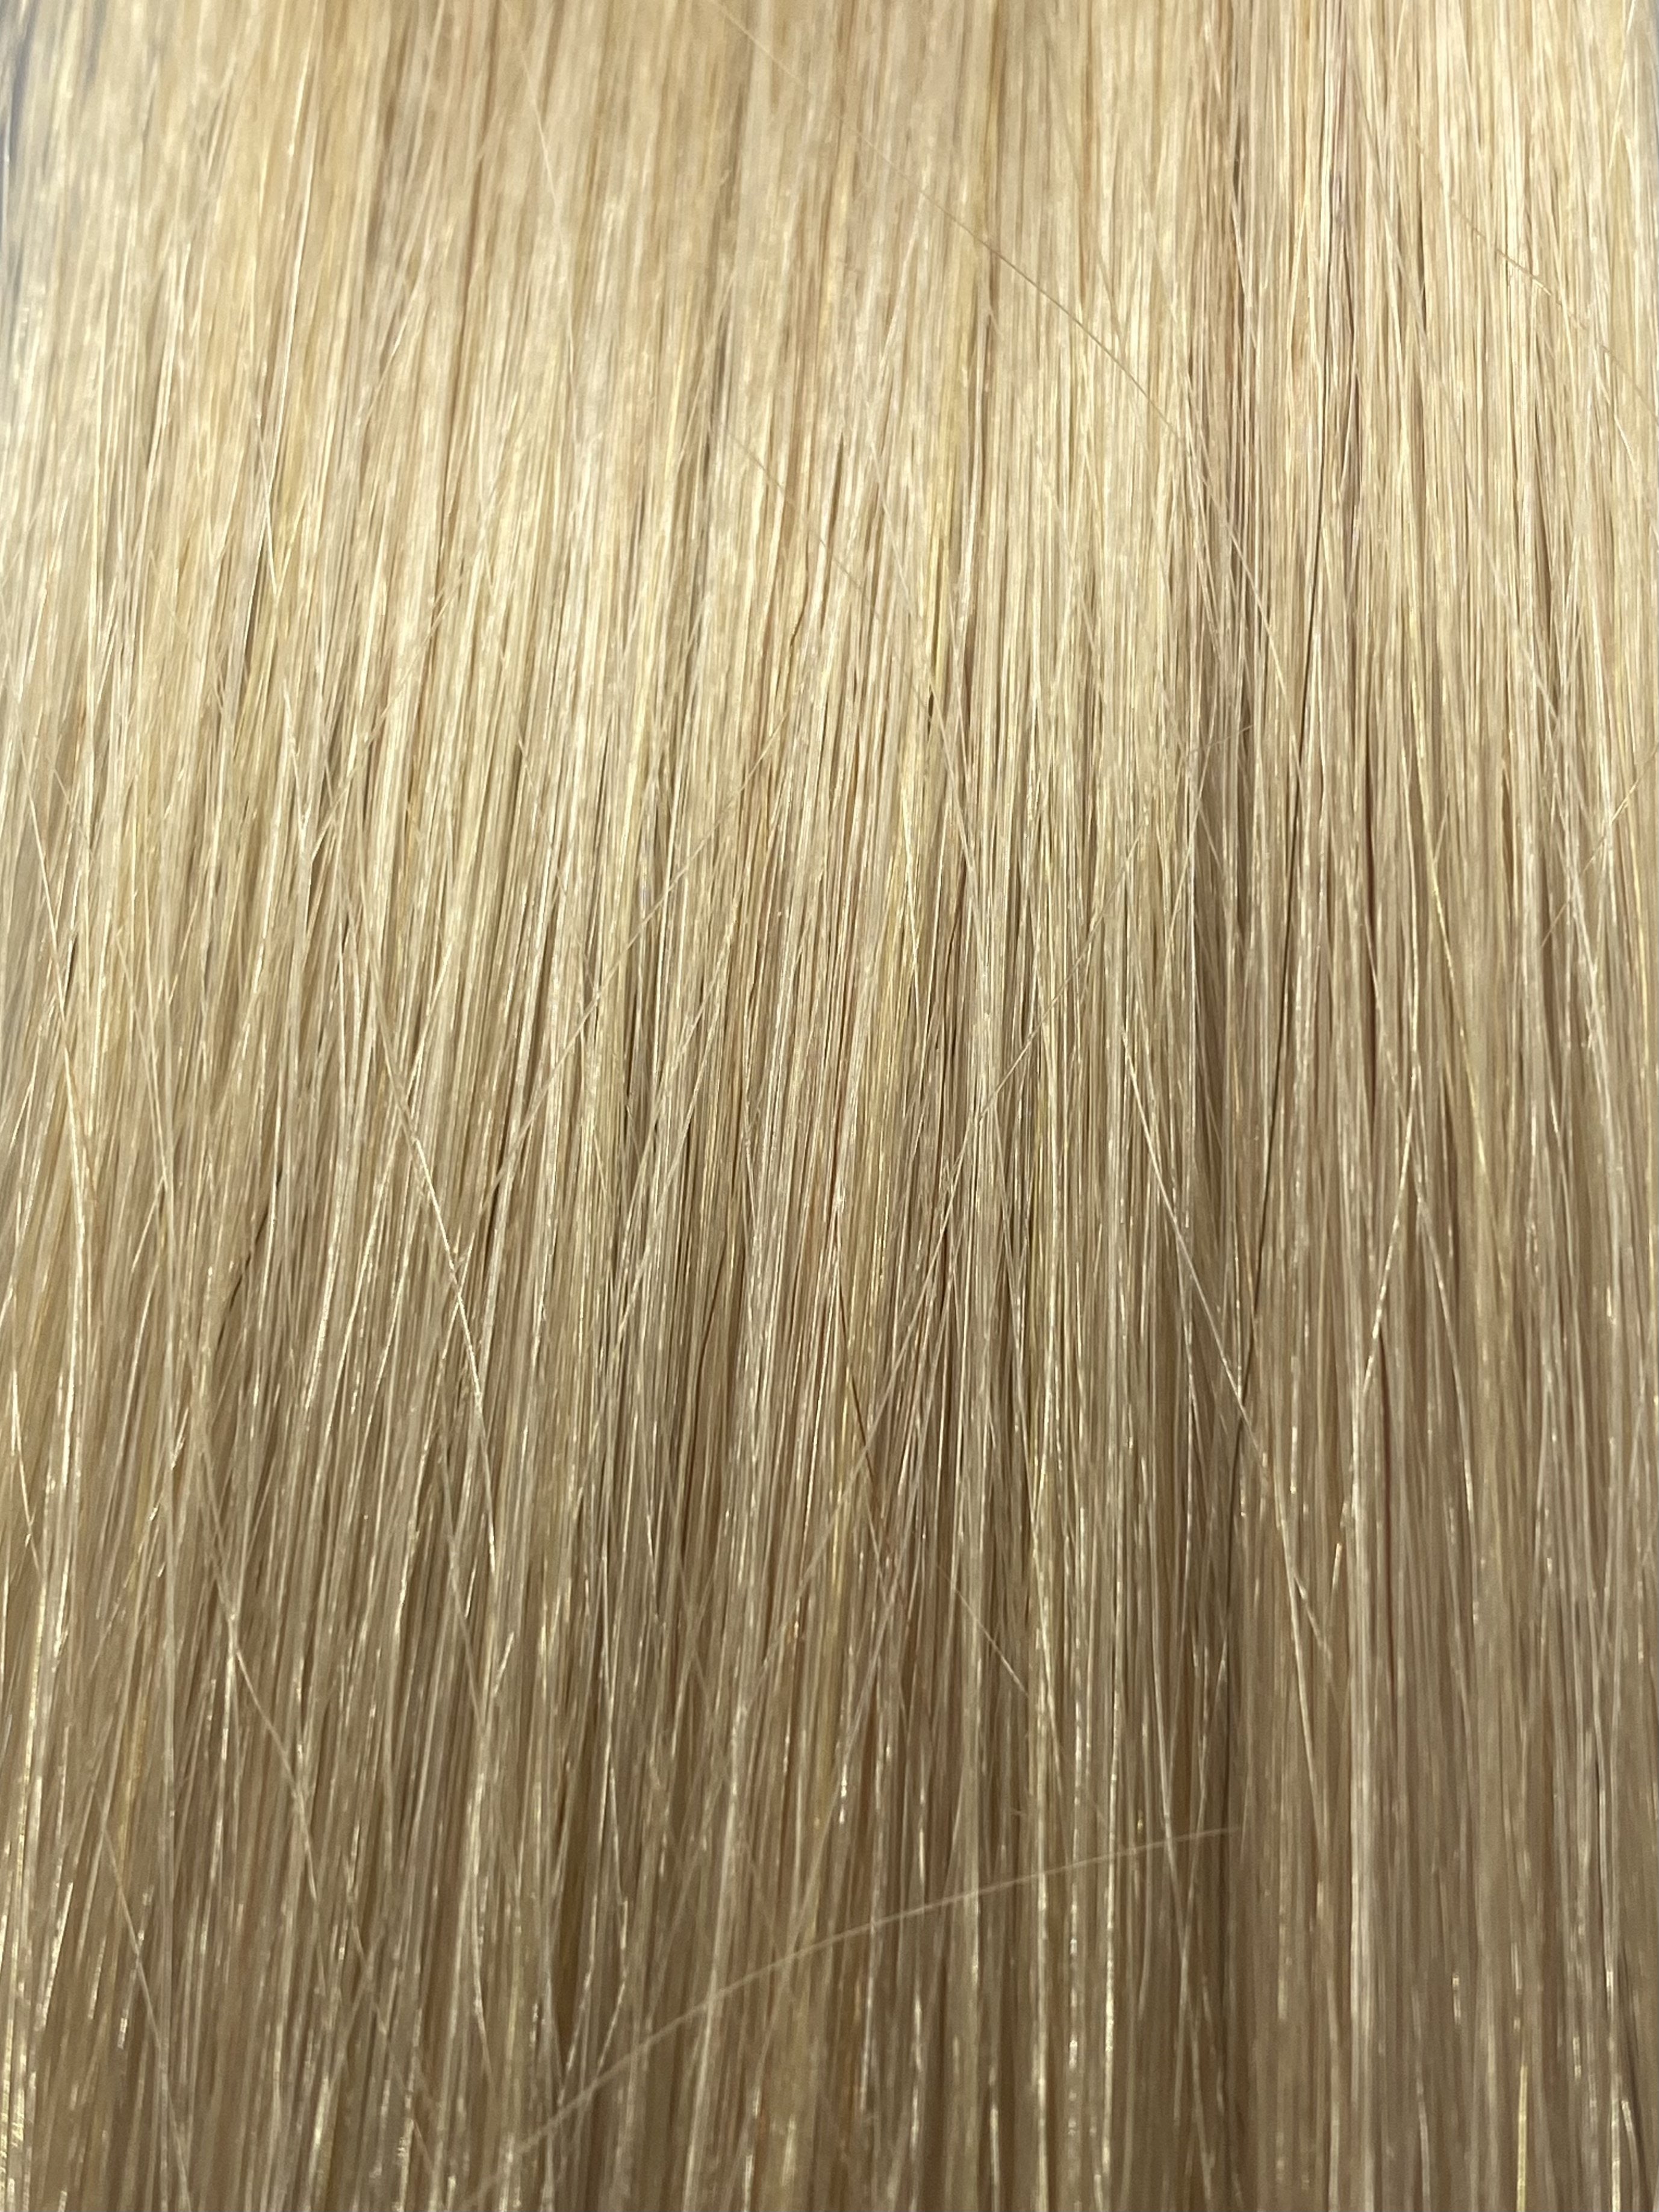 FUSION #1002 VERY LIGHT ASH BLONDE 50CM/ 20 INCHES  -  20 GRAMS - Image 1